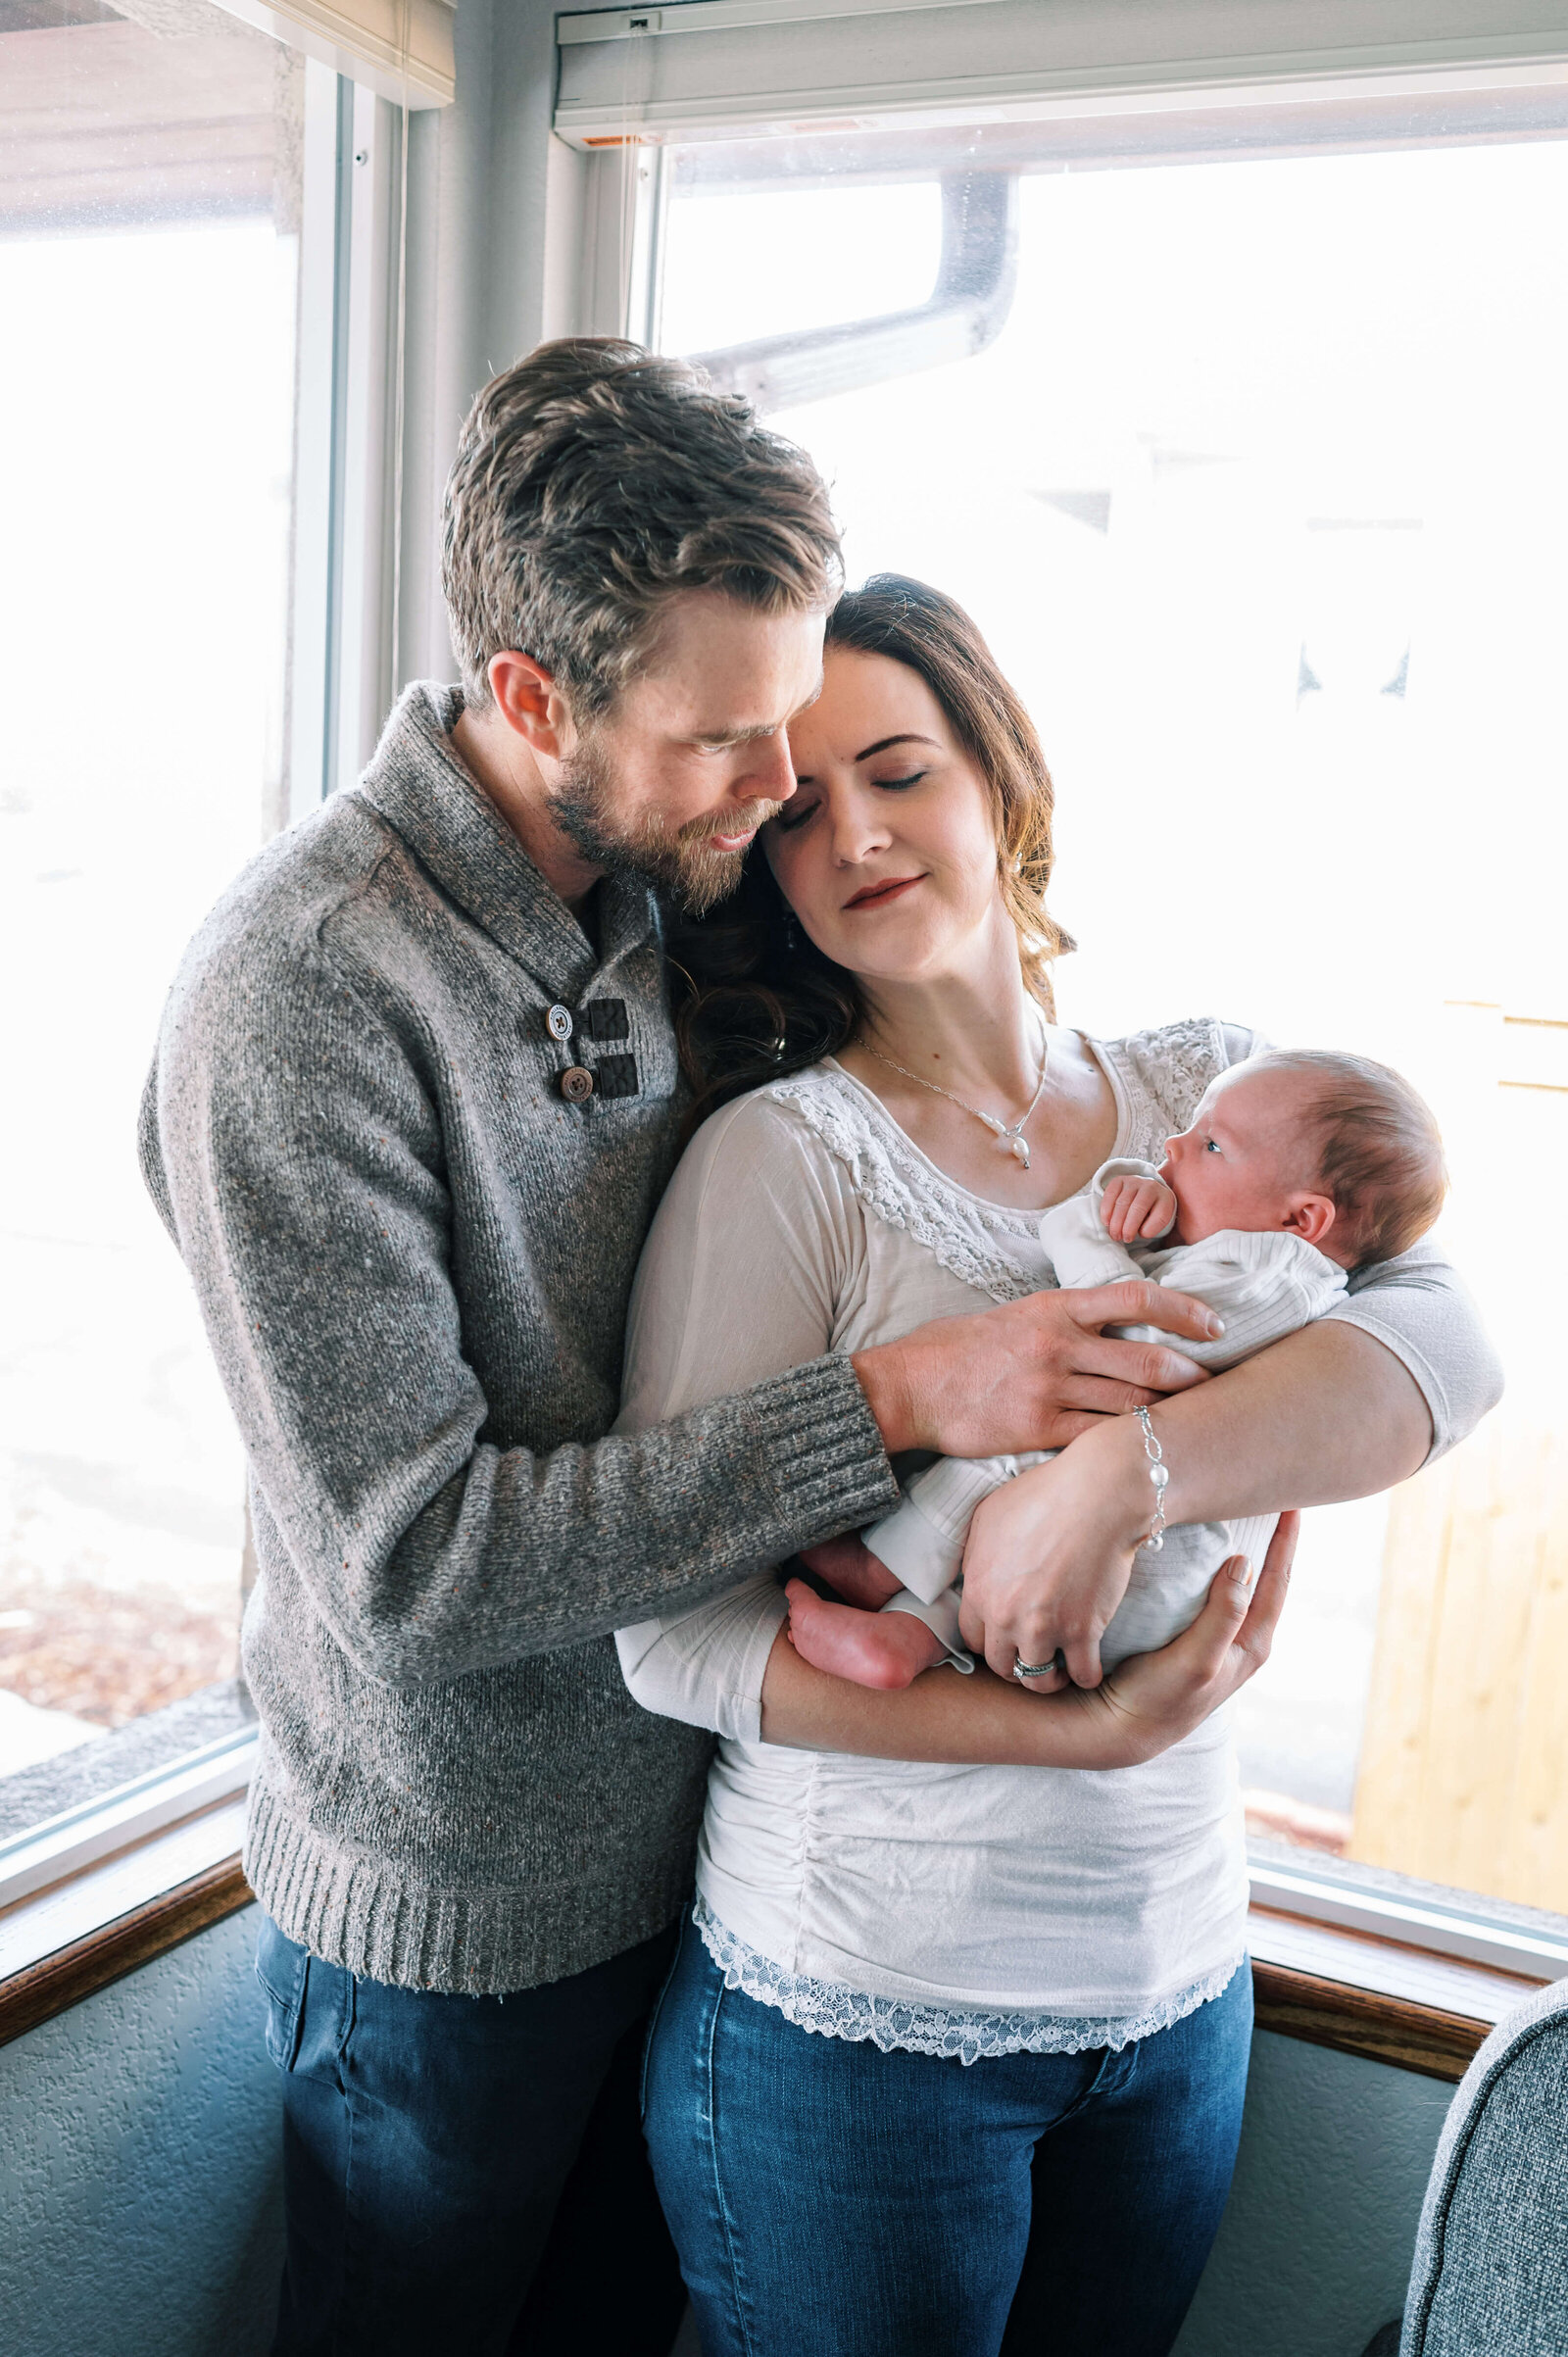 A family hugs their newborn son in an image by Northern Virginia family photographer, Erin Winter